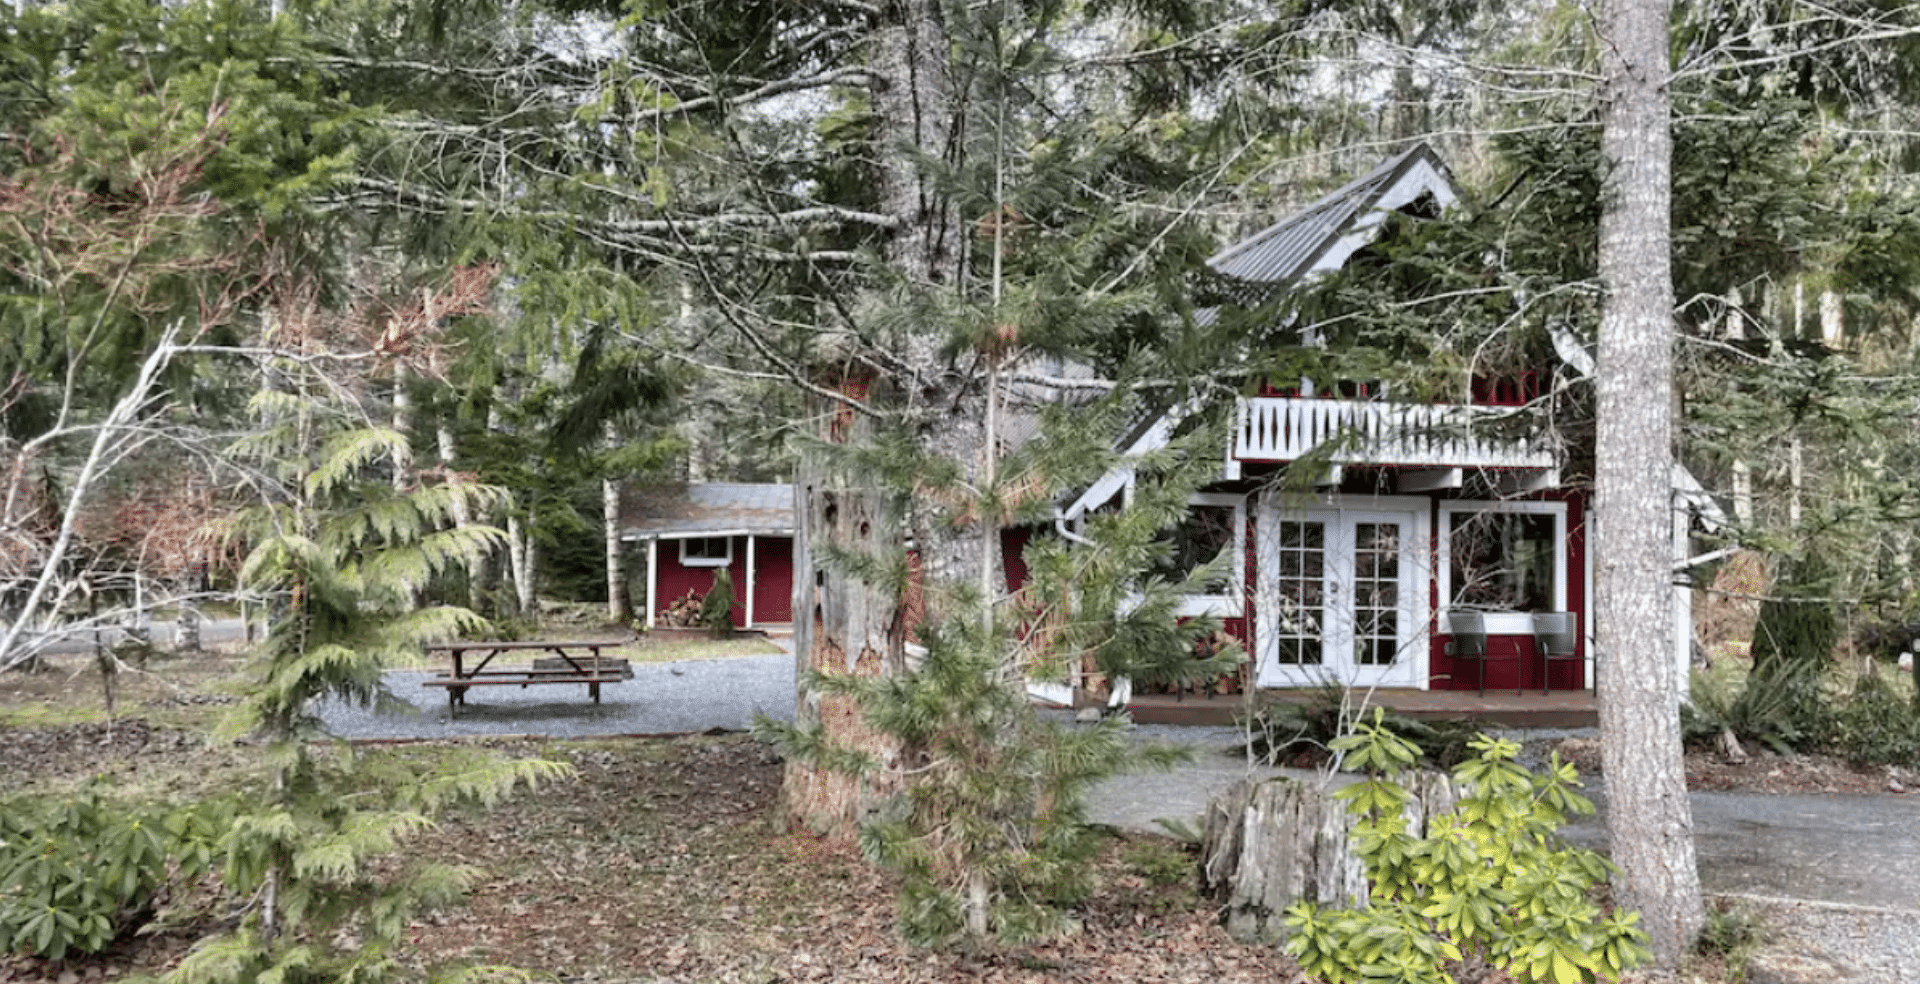 The Red Chalet